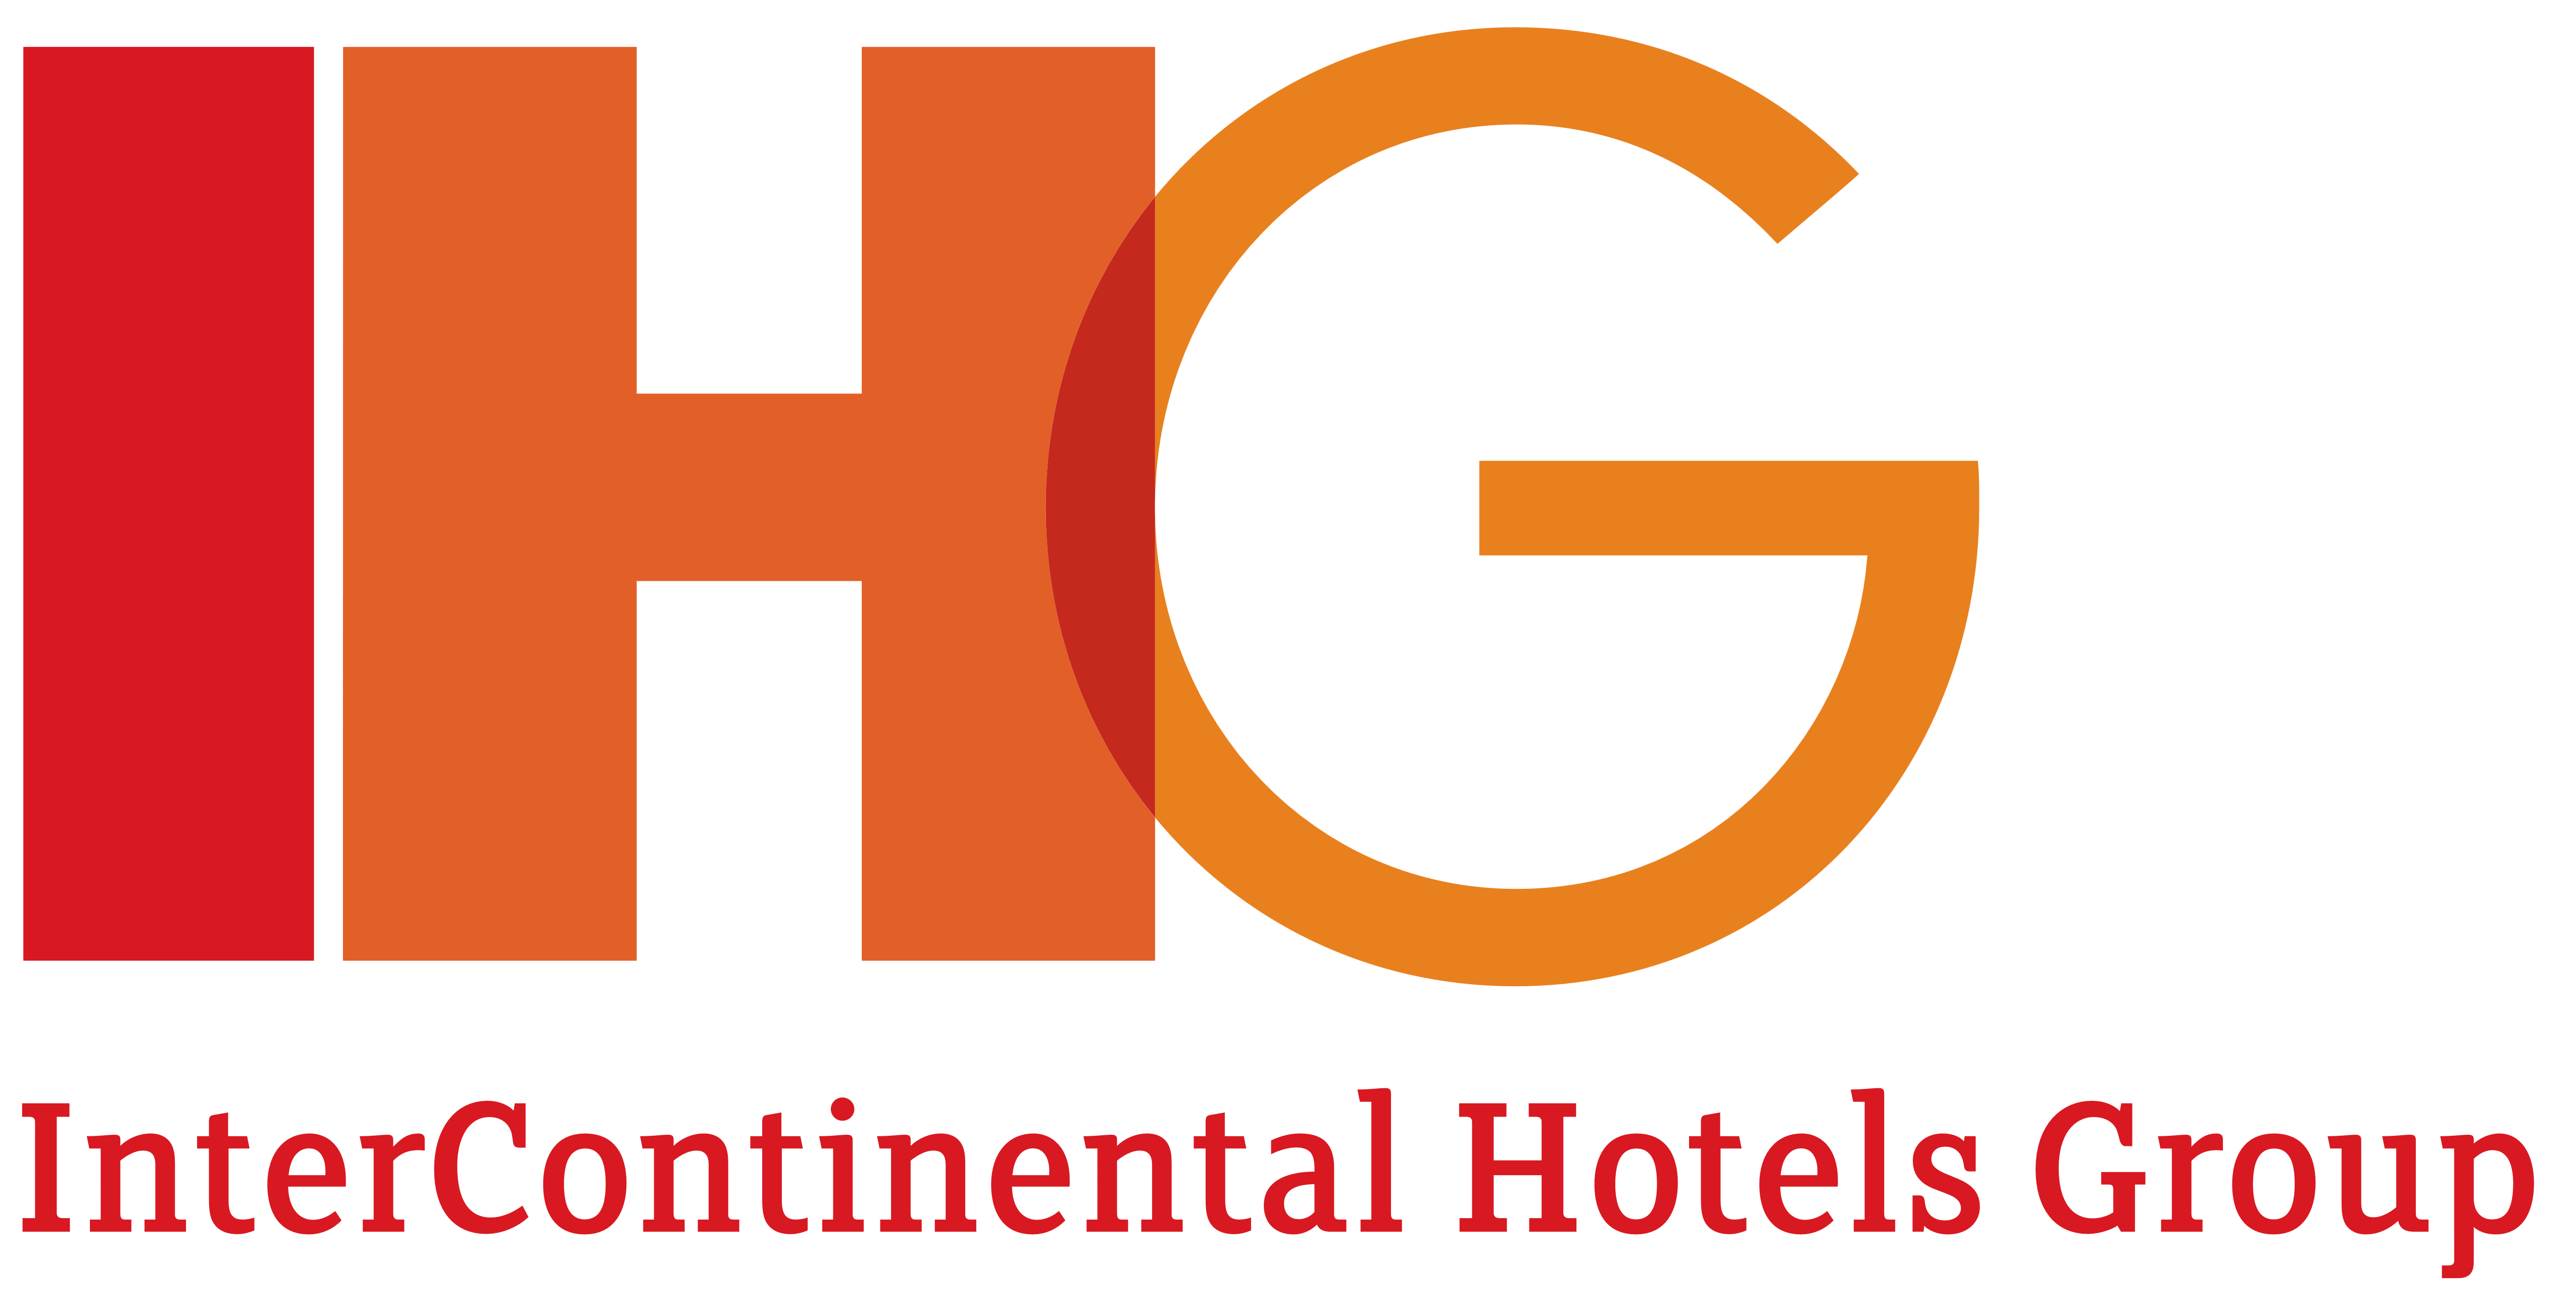 Ihg corporate coupon codes, promo codes and deals